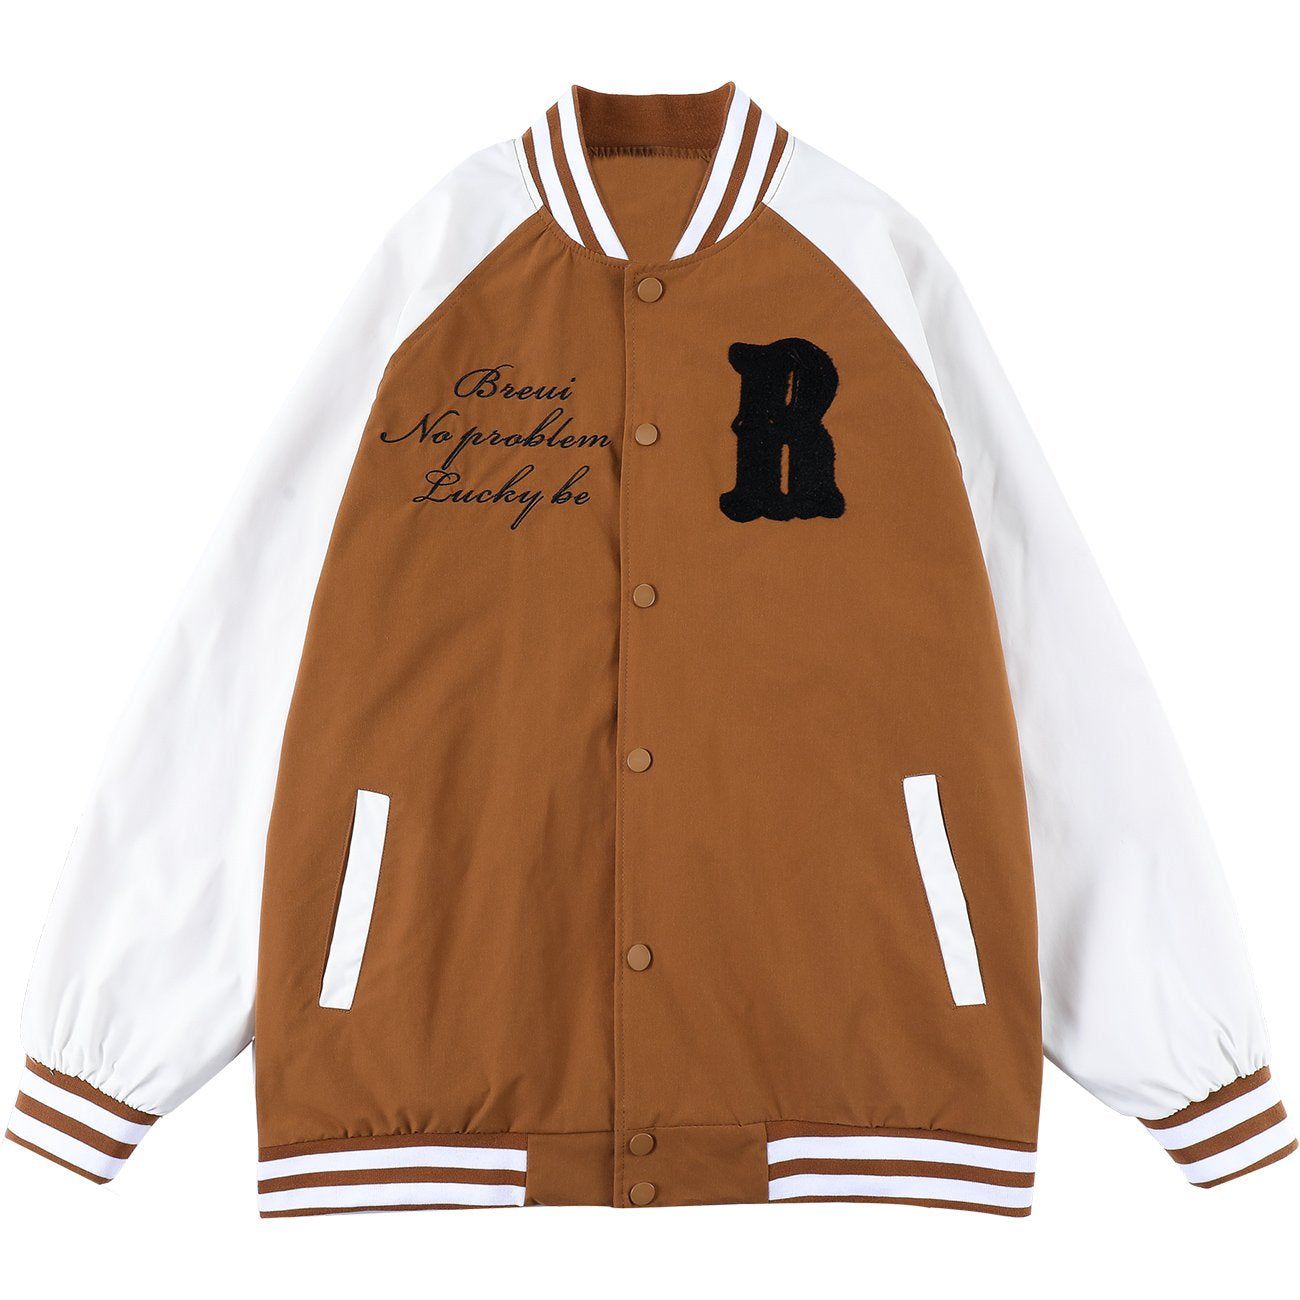 LUXENFY™ - Letter R Embroidered Varsity Jacket luxenfy.com